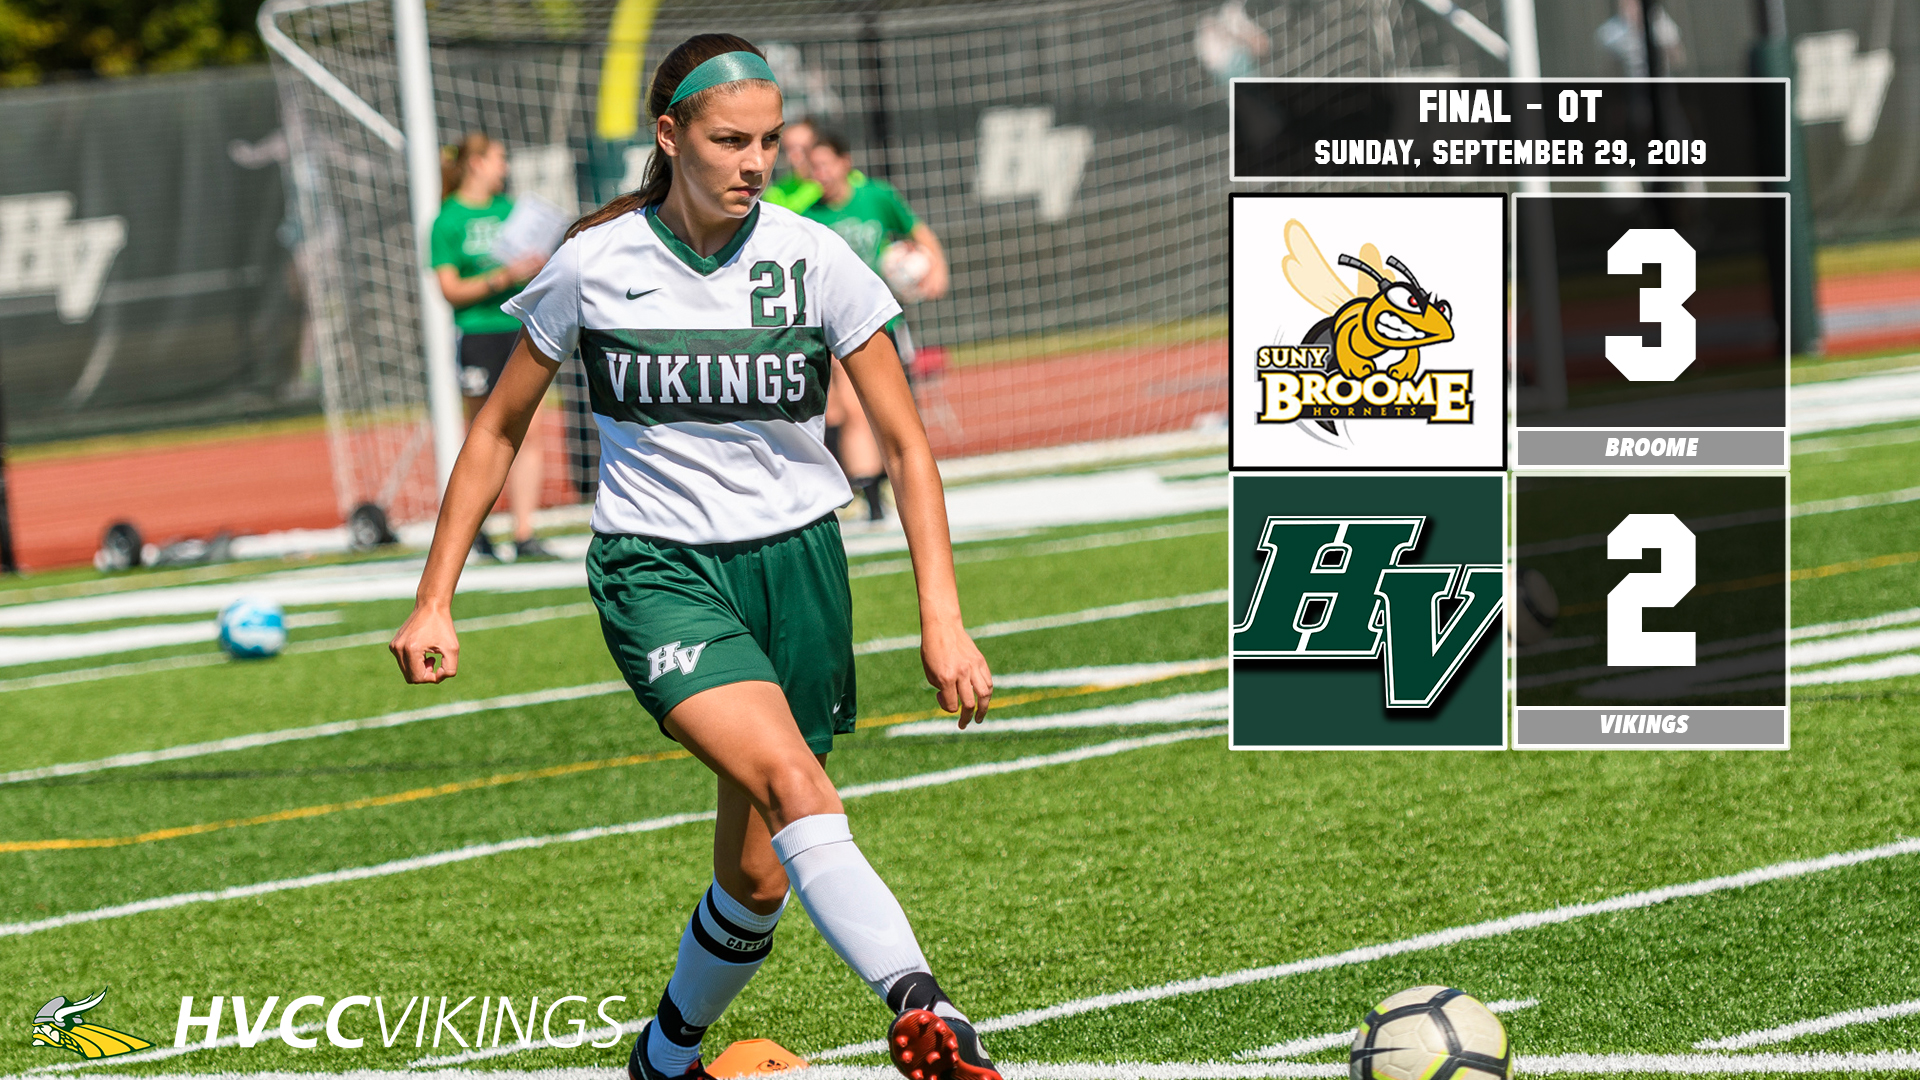 Women's soccer lost 3-2 in overtime at Broome on 9/29/19.